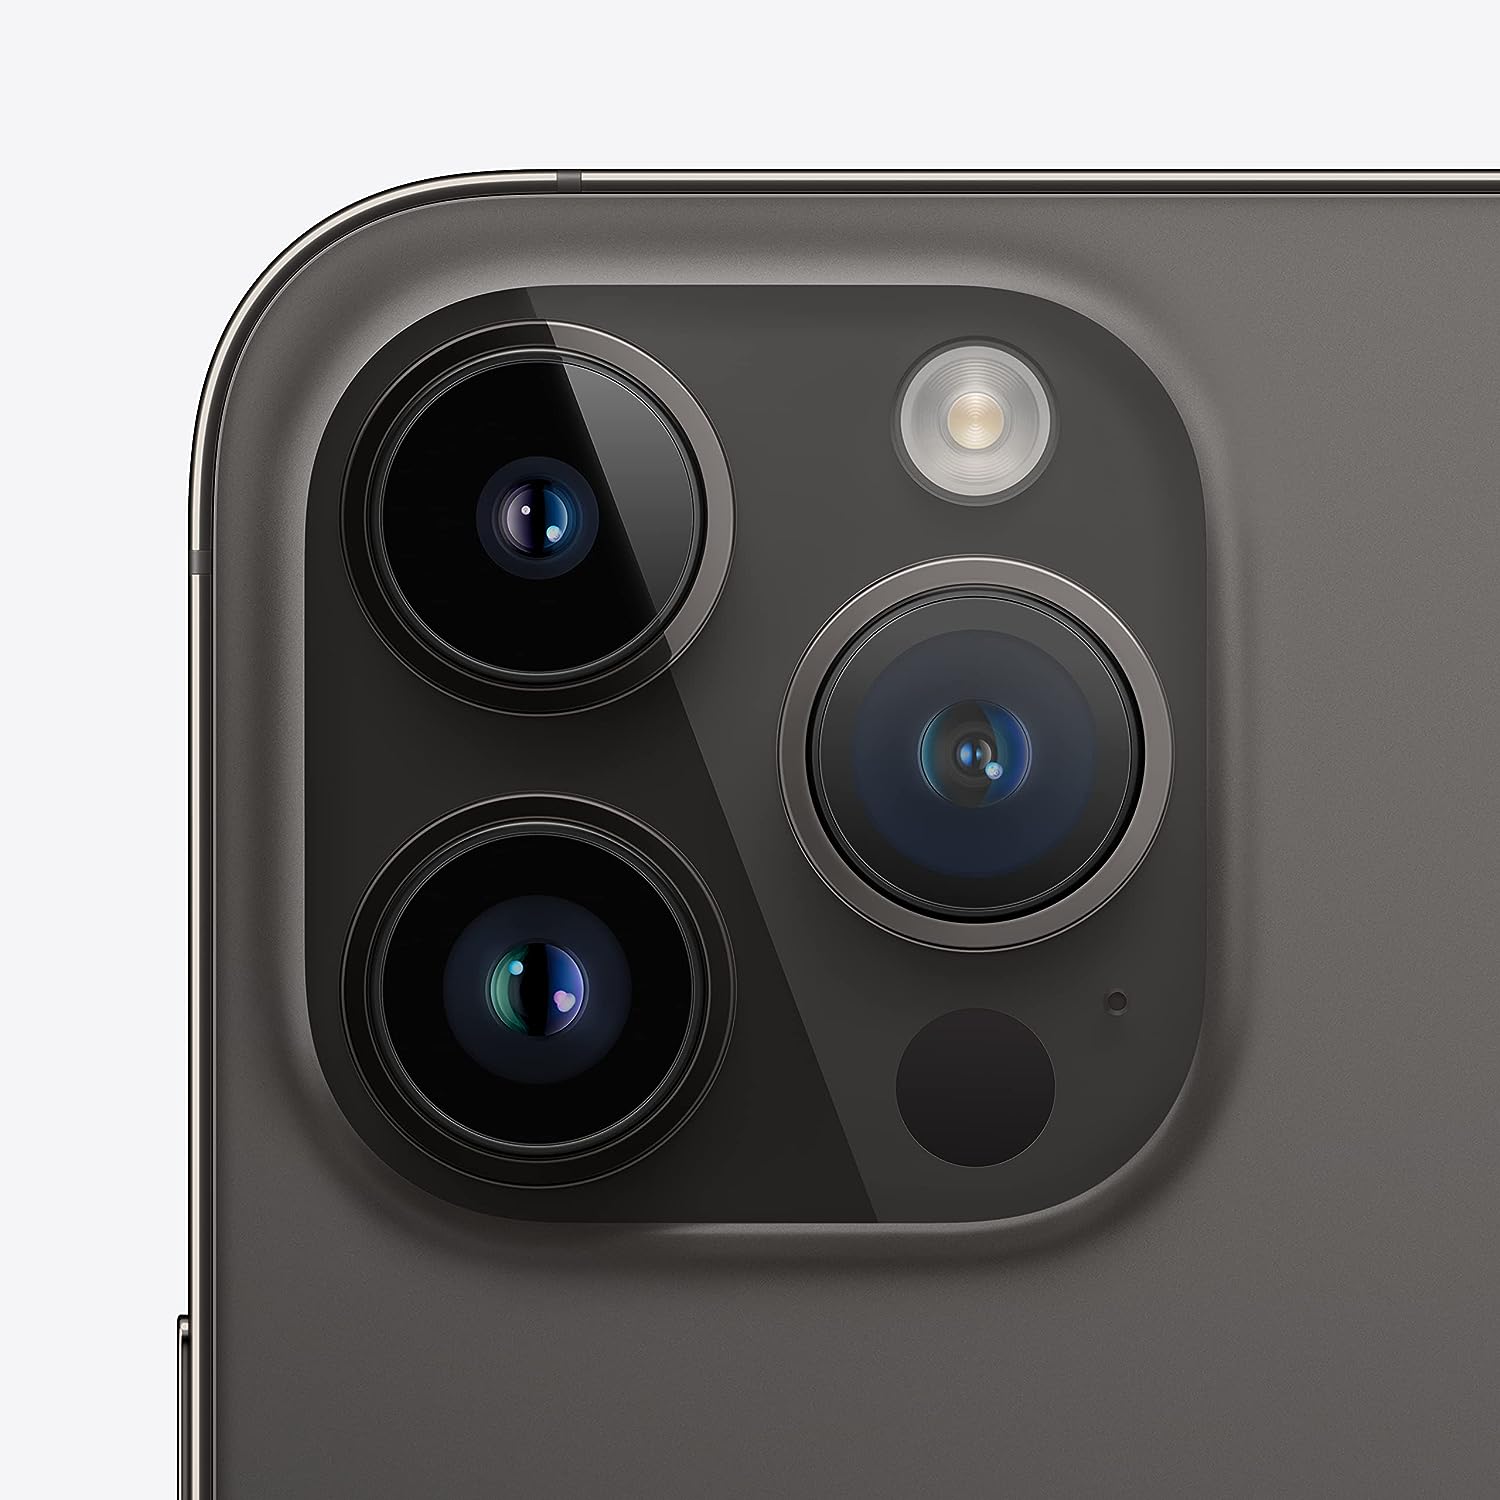 This image shows a close-up of the rear camera system of aniPhone 14 Pro Max. It features a triple-lens setup, with each lens surrounded by a metal ring, and includes a smaller sensor and an LED flash. This type of camera configuration is typically found on high-end smartphones and is designed to offer users a variety of photo and video capabilities, such as wide-angle shots, telephoto zoom, and enhanced low-light performance.